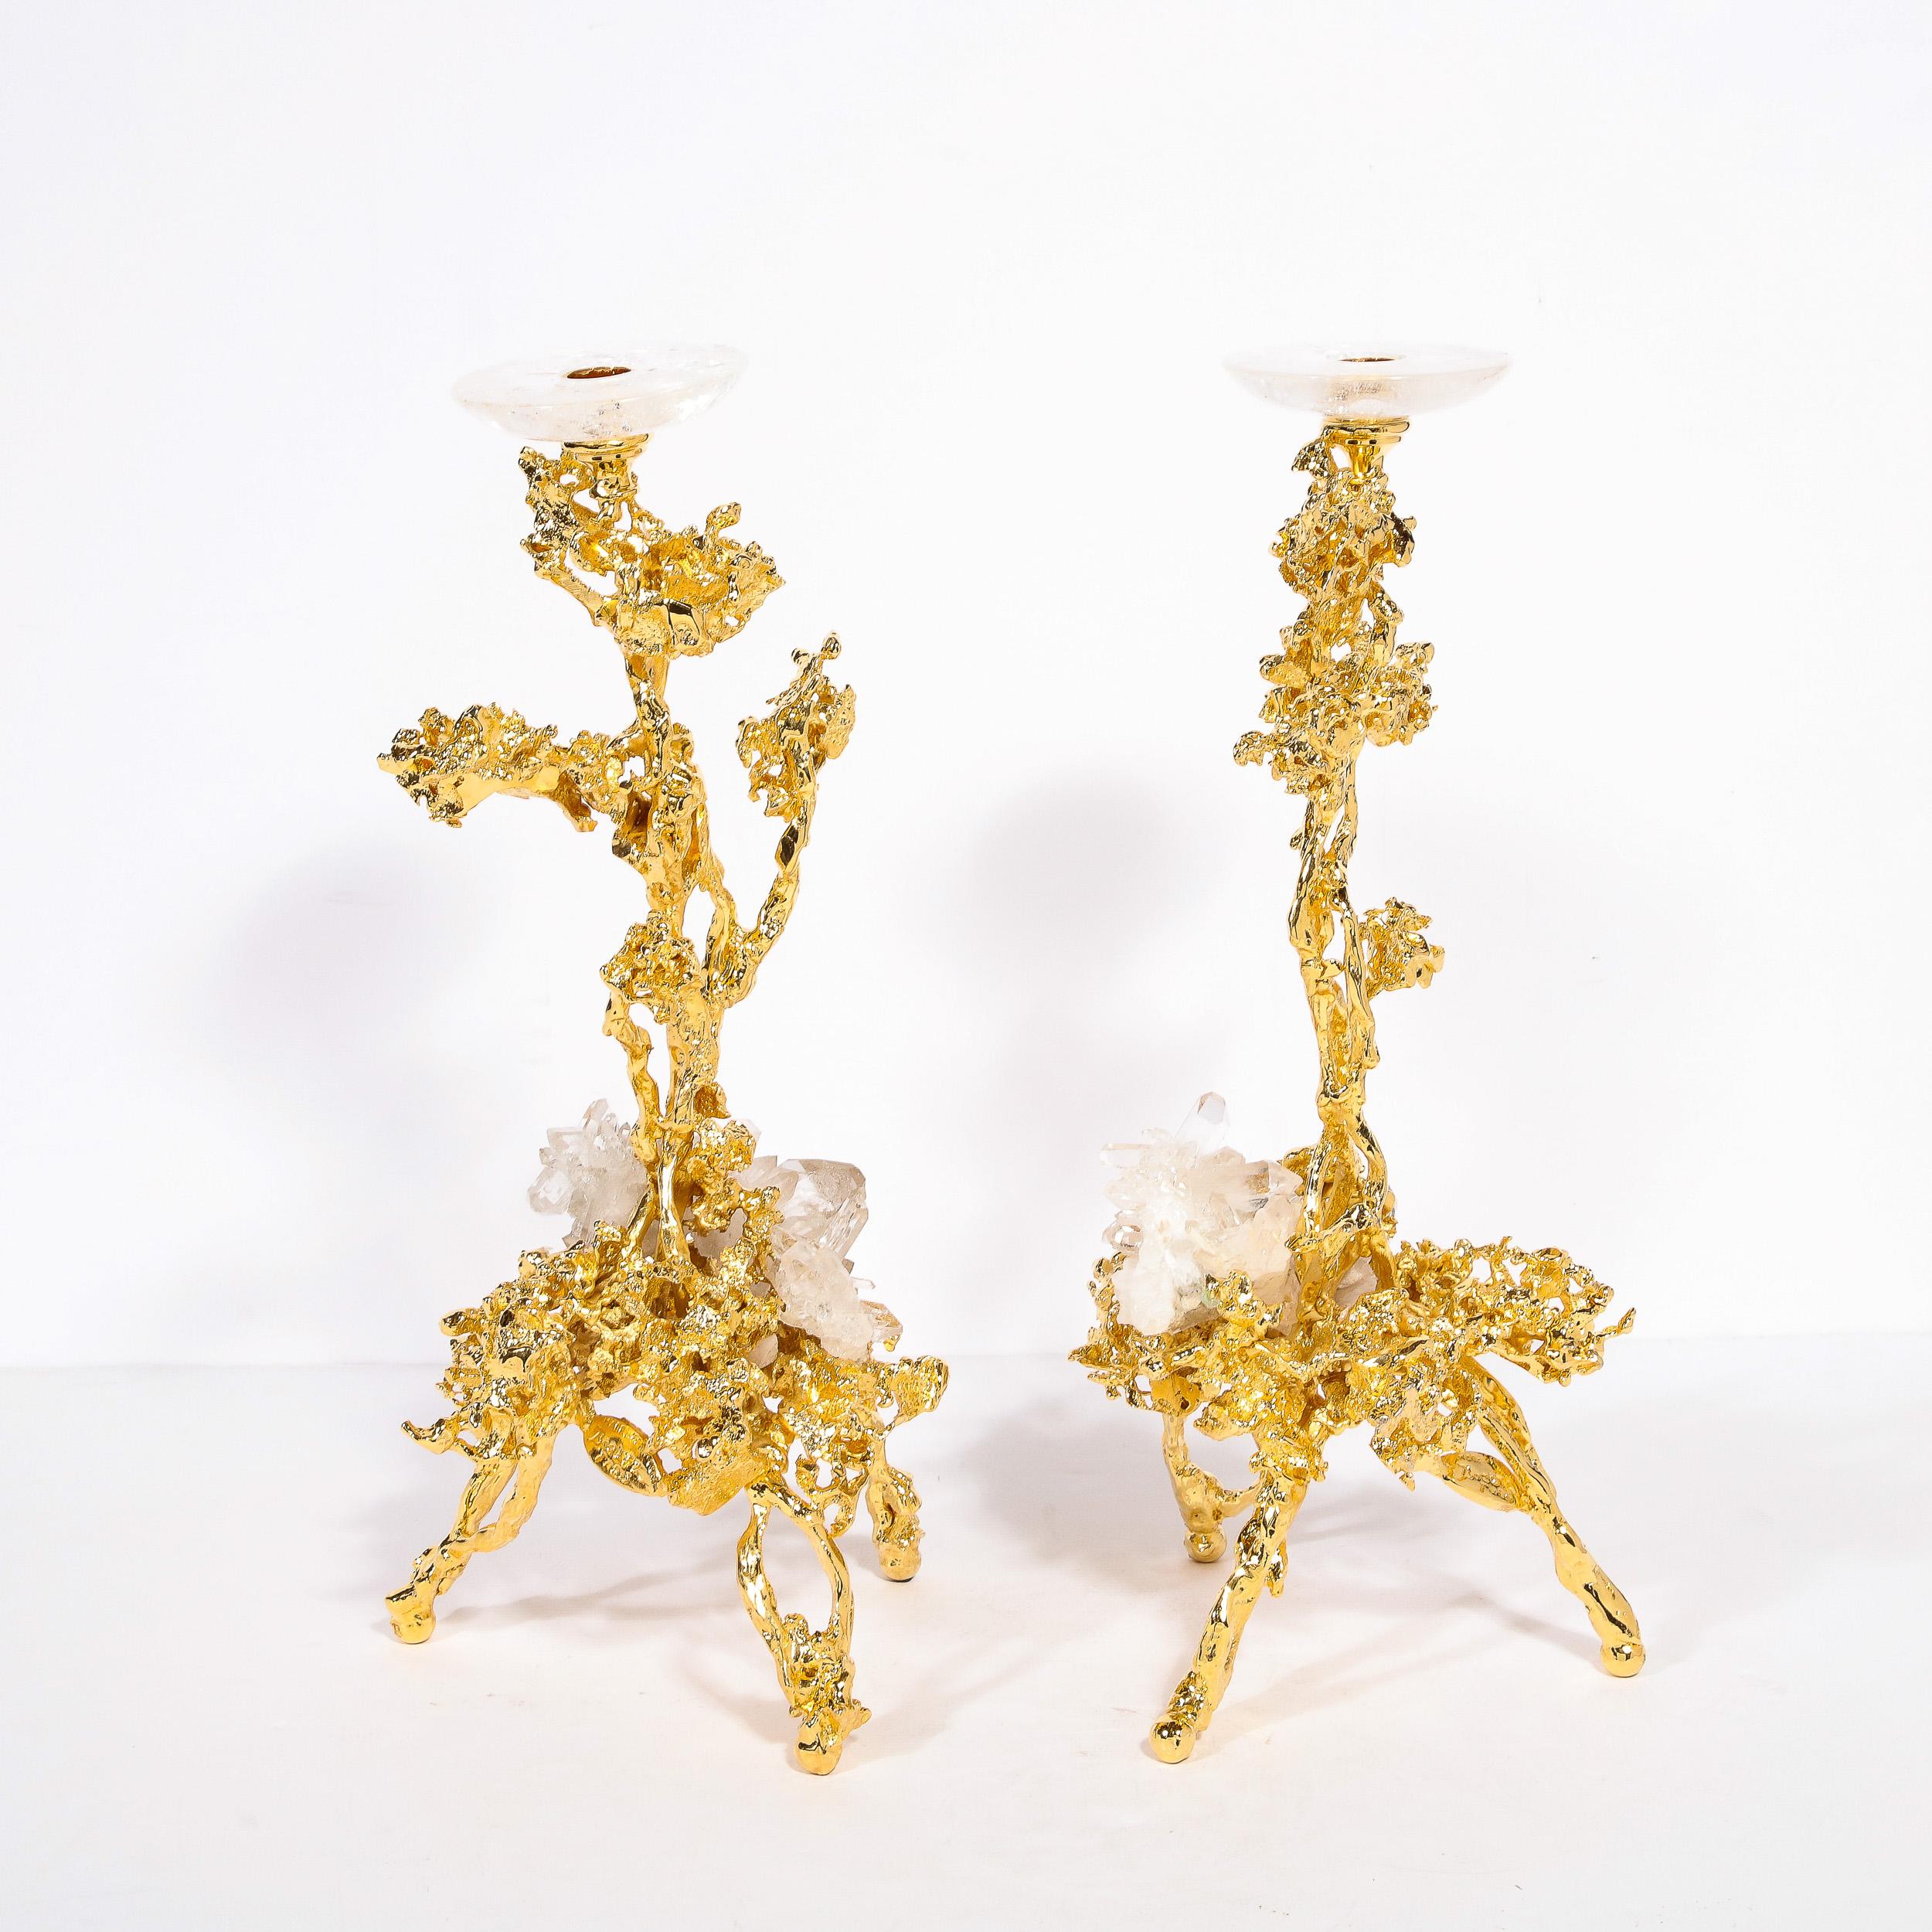 Pair of 24K Gold Single Branch Candleholders w/ Rock Crystals by Claude Boeltz For Sale 4